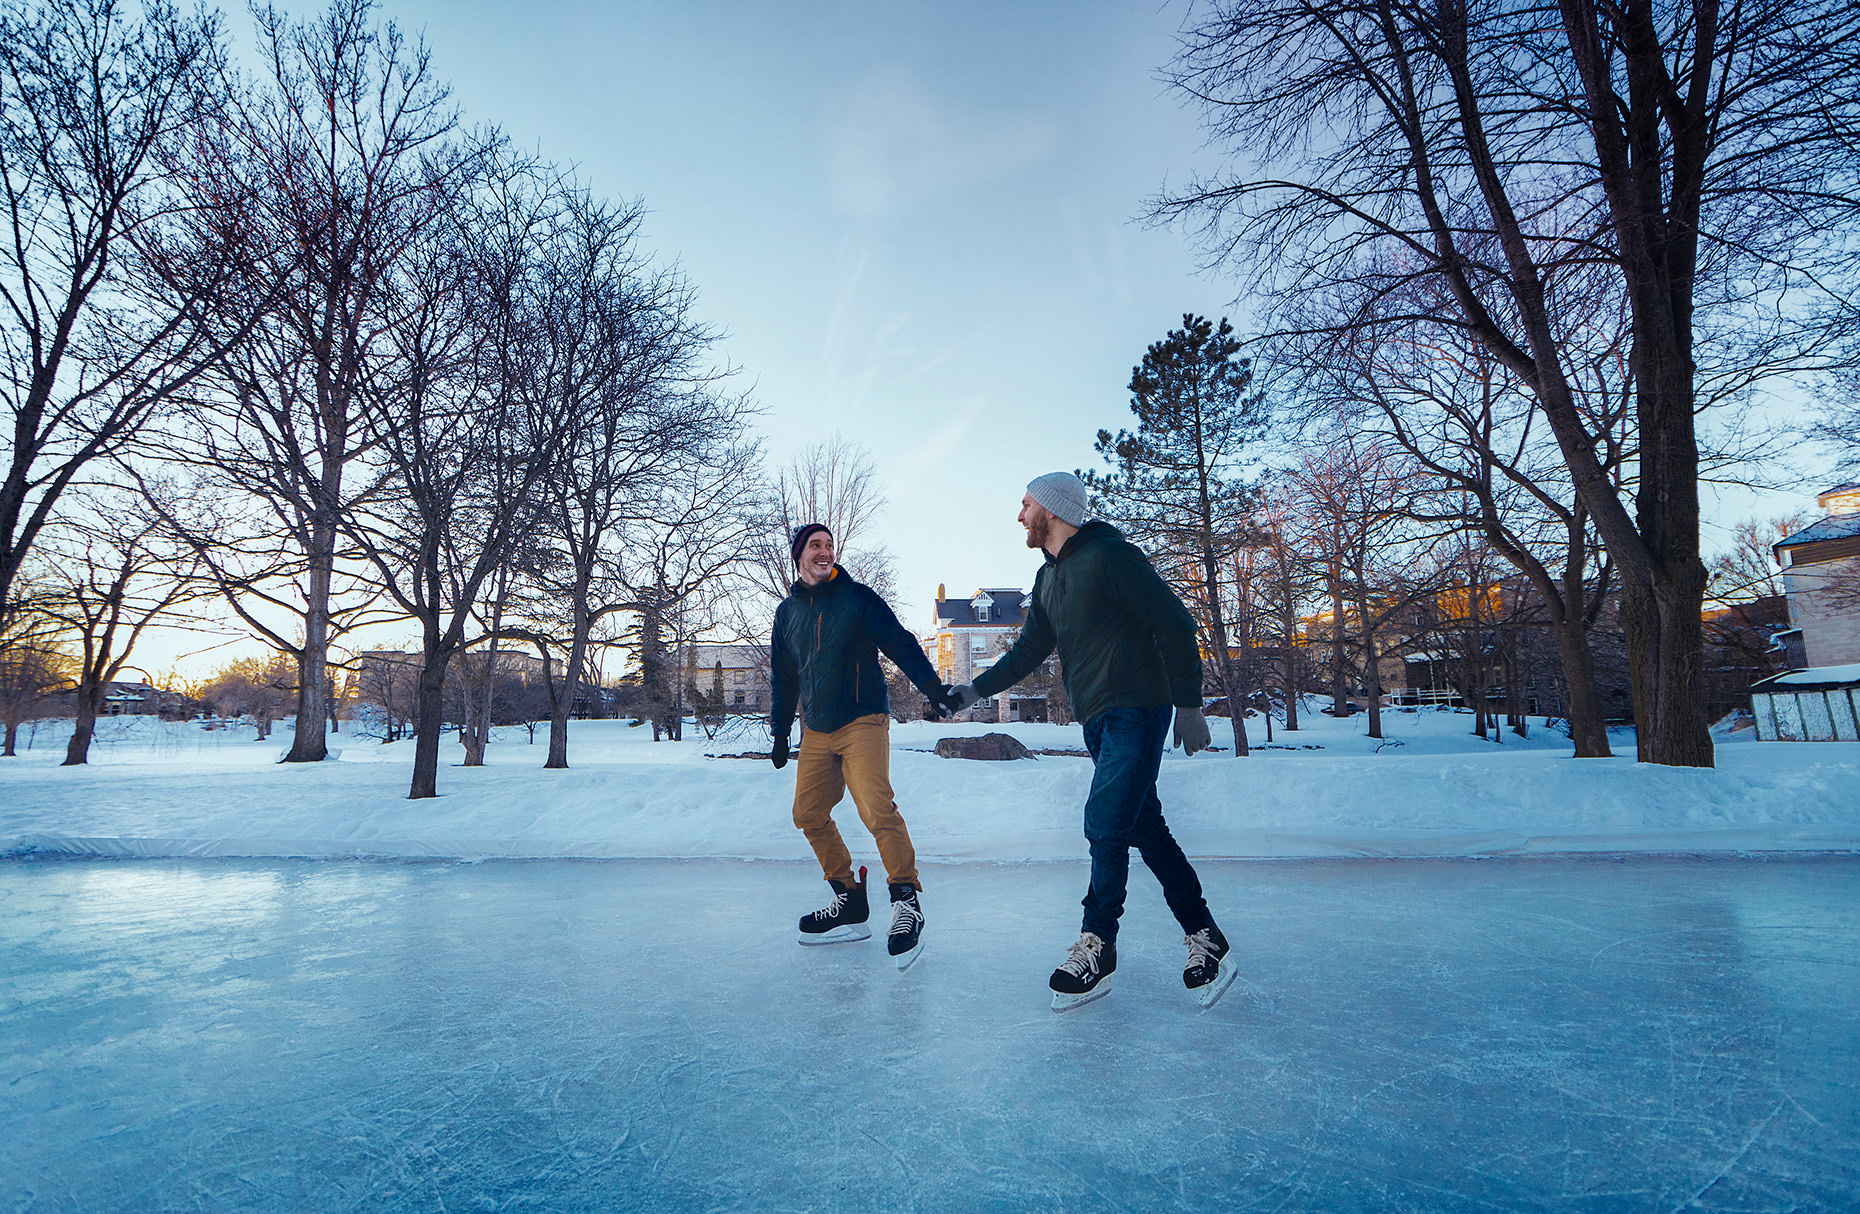 CommercialPhotographer Matthew Liteplo , from Ottawa, shot this for a tourism campaign